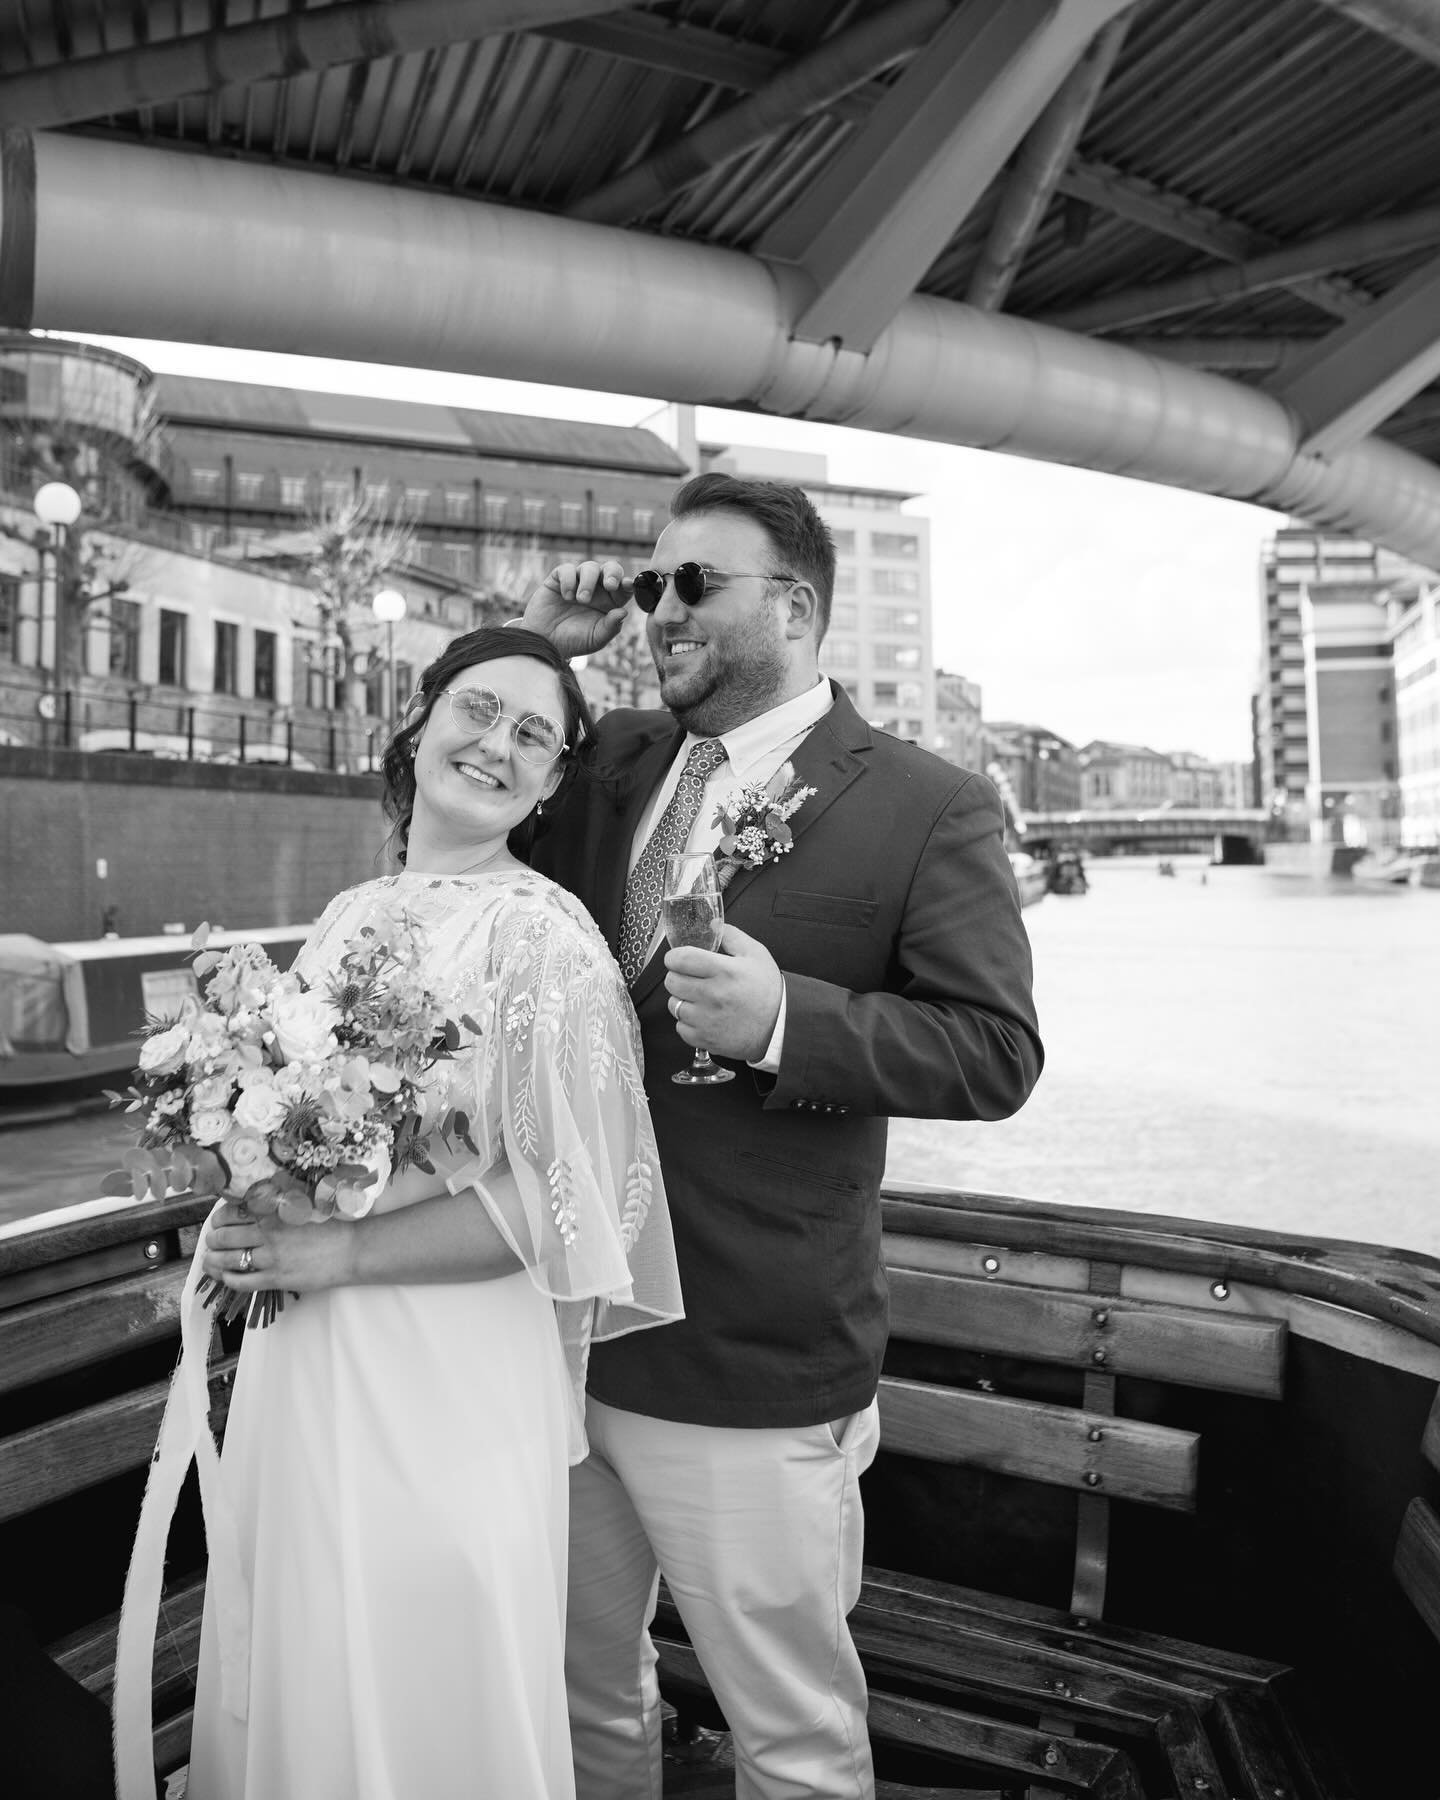 Gallery delivery day for these cool cats&hellip; so much love for their review! ❤️

&ldquo;Having Florence as part of our wedding was an absolute joy and one of the best decisions we made! She captured our special day beautifully, her relaxed style m